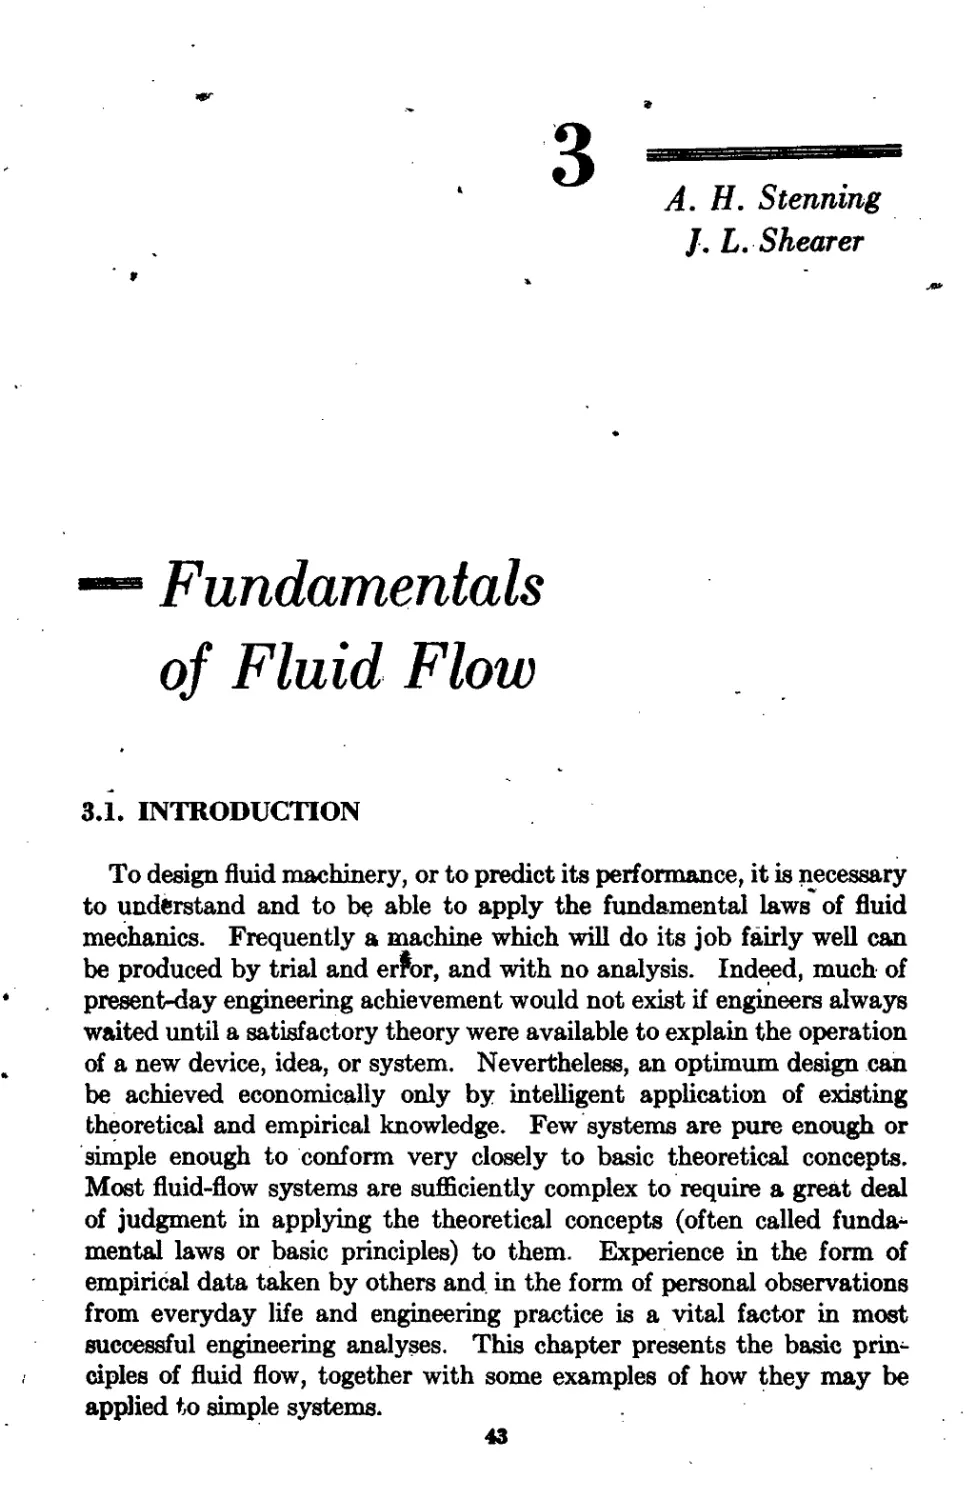 Chapter 3 Fundamentals of Fluid Flow--A. H. Stenning and J. L. Shearer